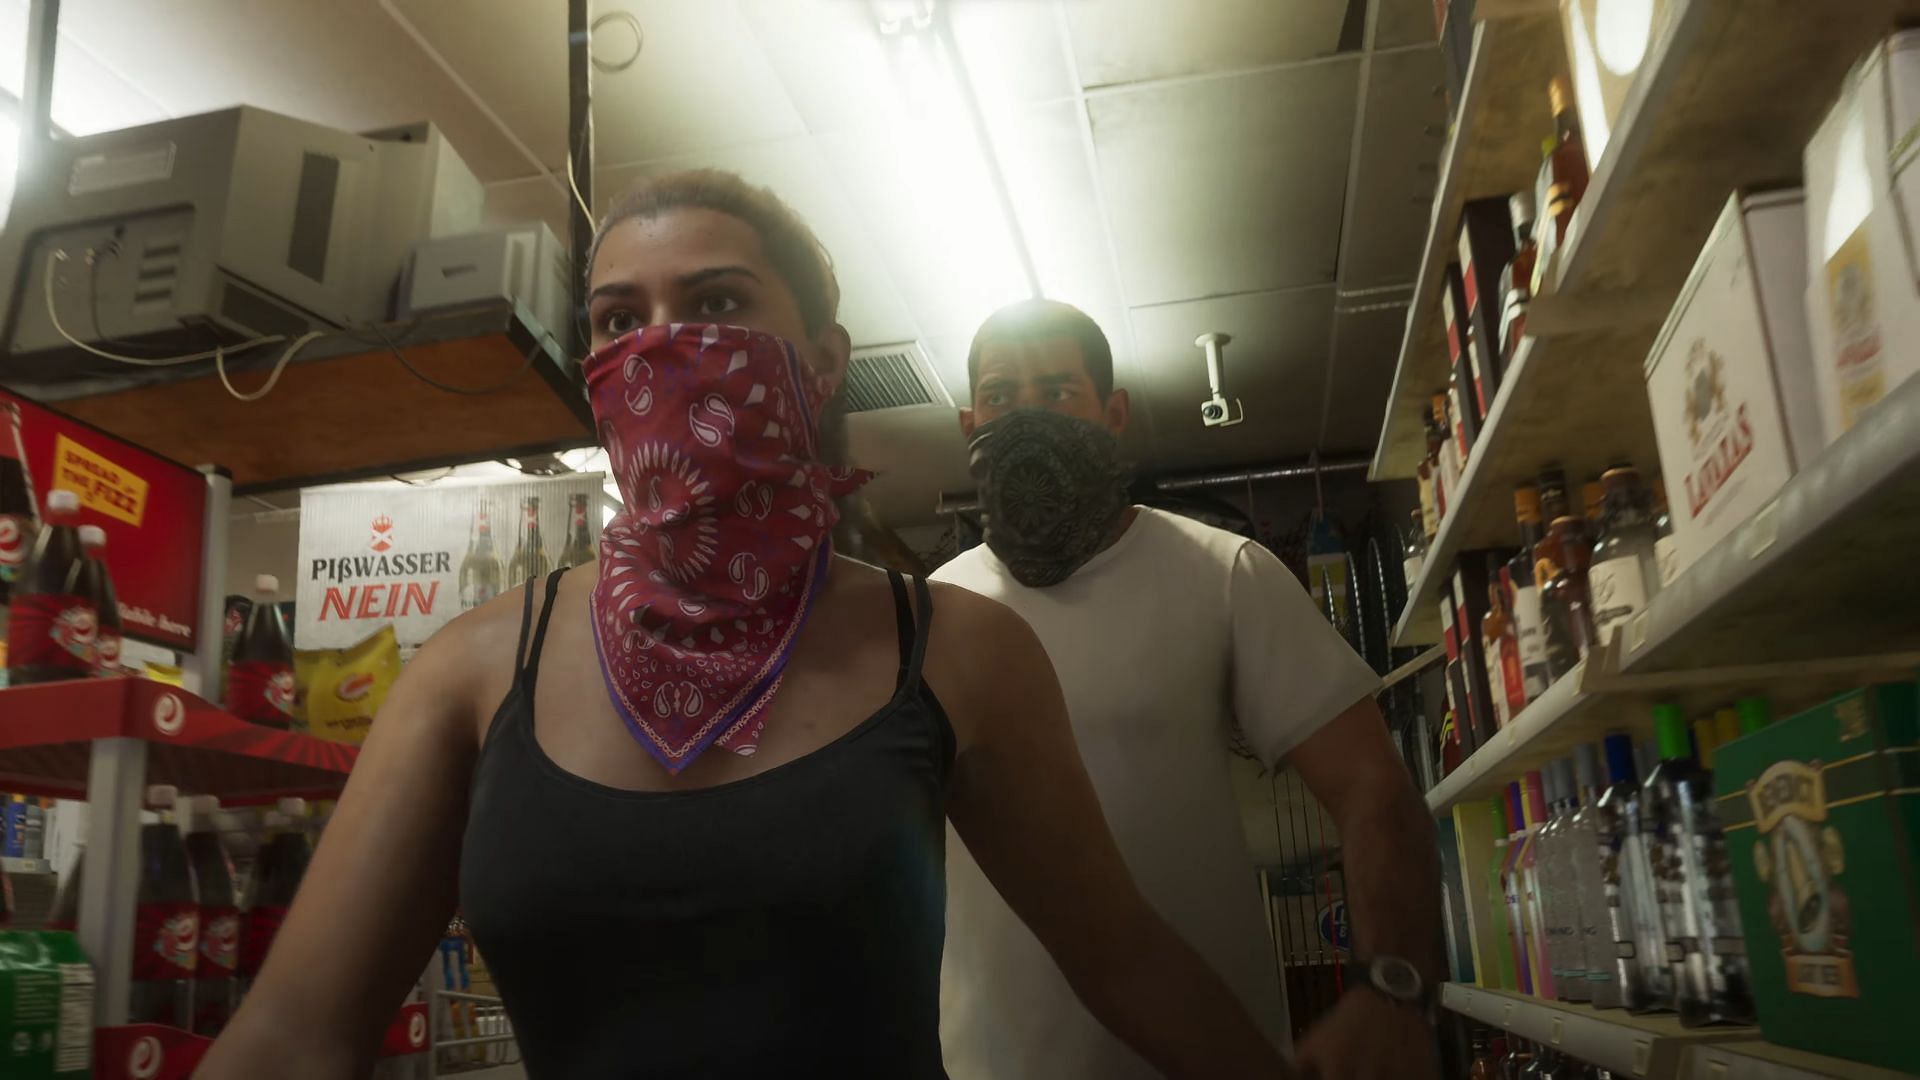 GTA 6 characters Jason and Lucia recreated by AI stun fans with impeccable details
Latest